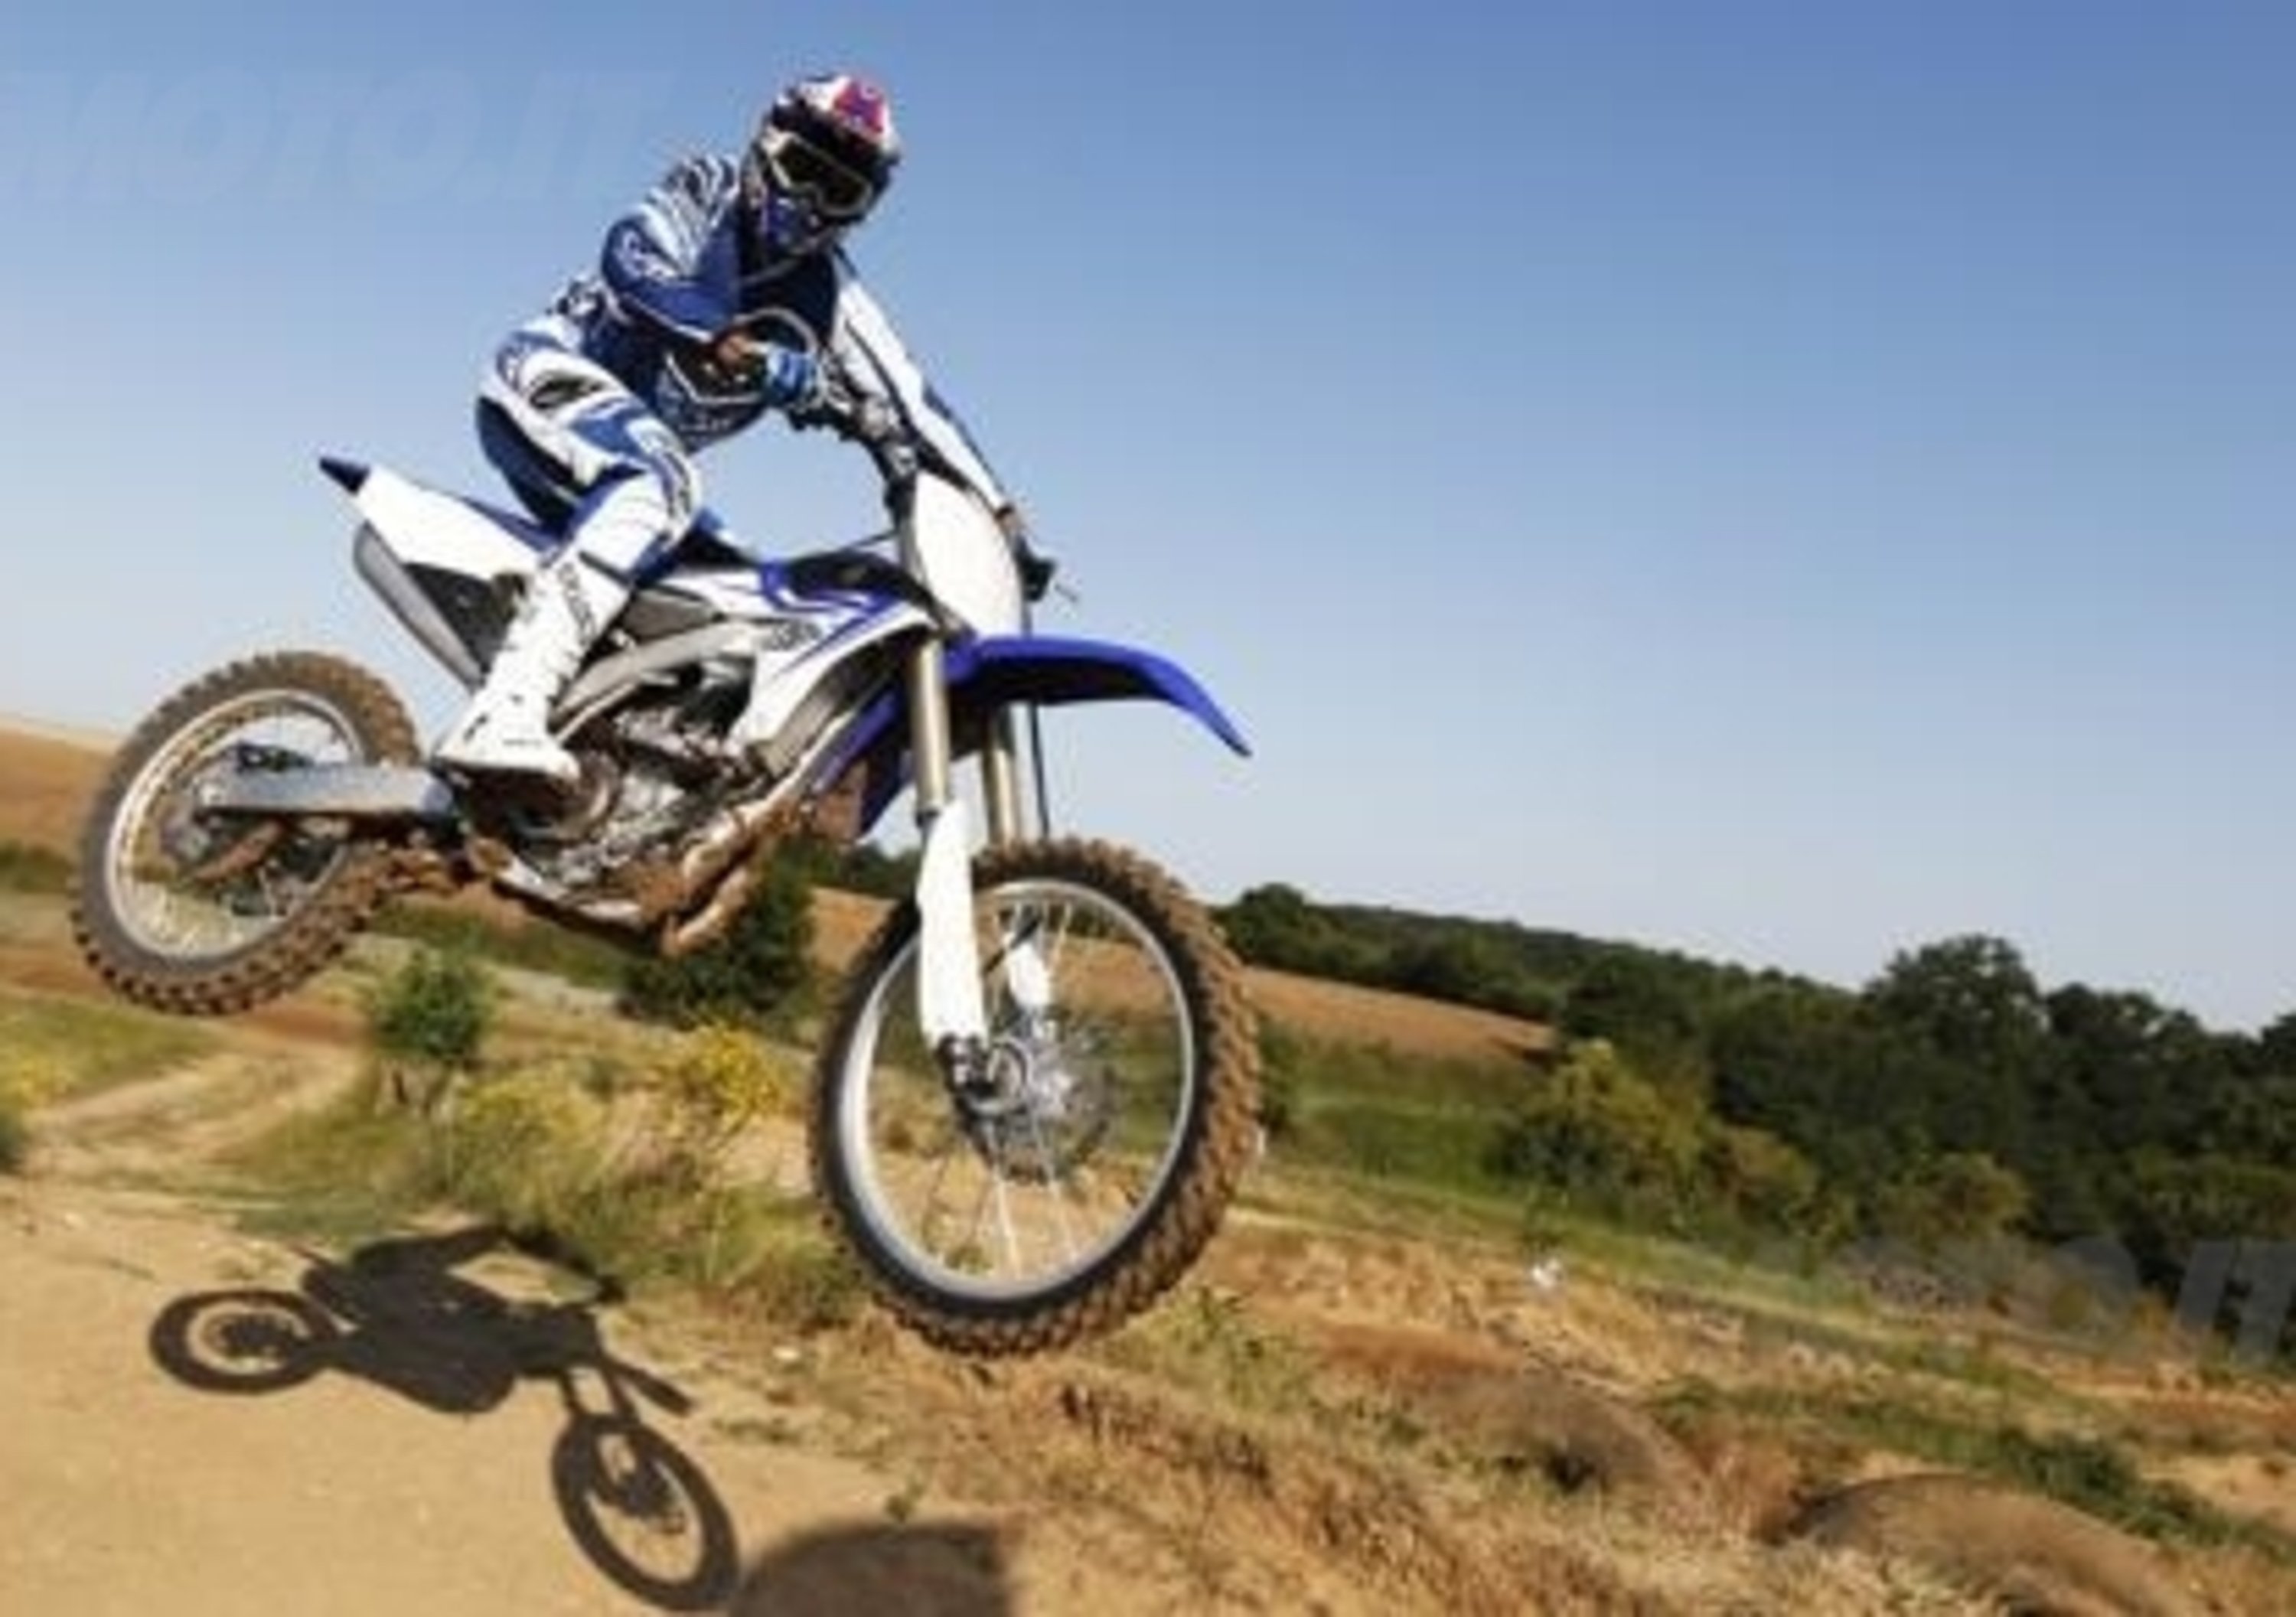 Paolo Pavesio: Yamaha investe nell&rsquo;offroad. Anche a 2 tempi